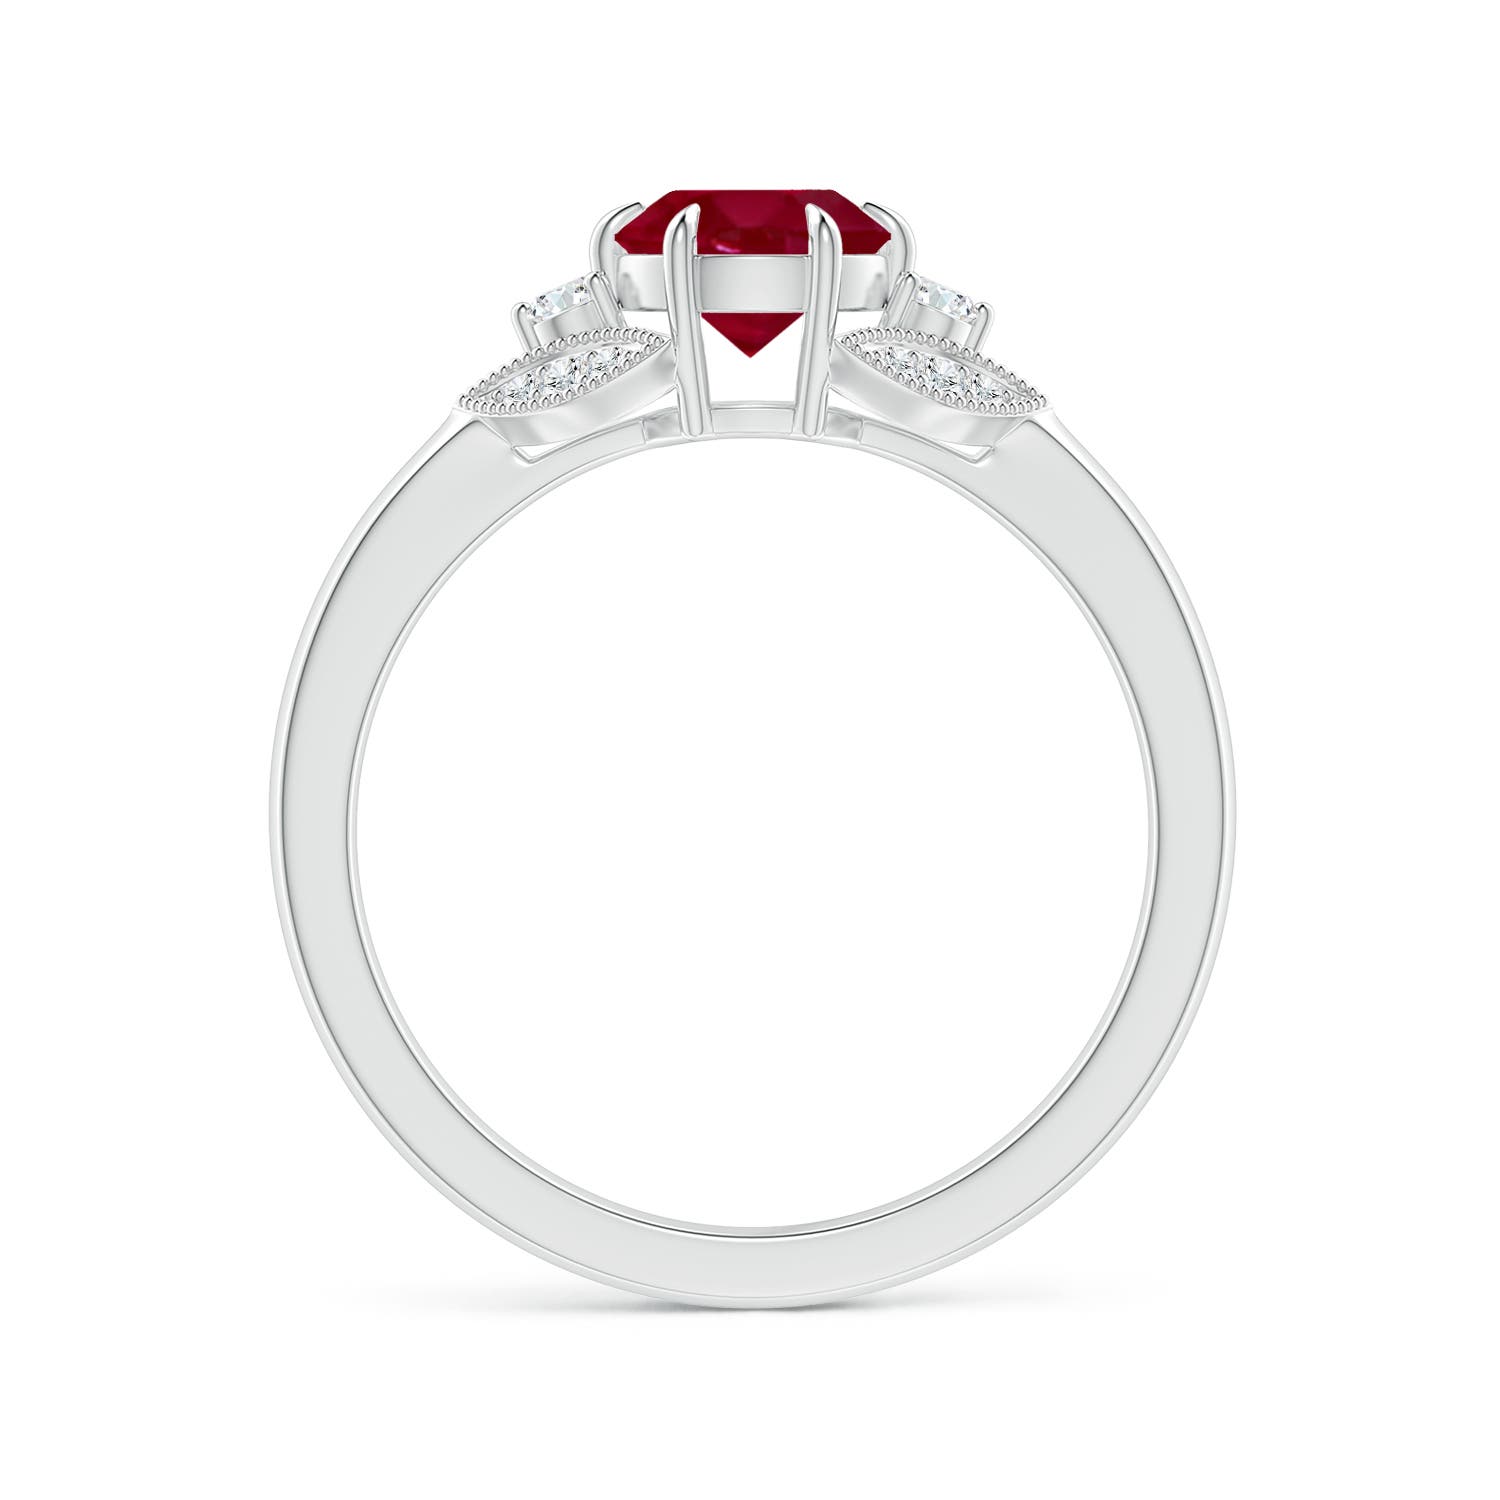 AA - Ruby / 1.1 CT / 14 KT White Gold